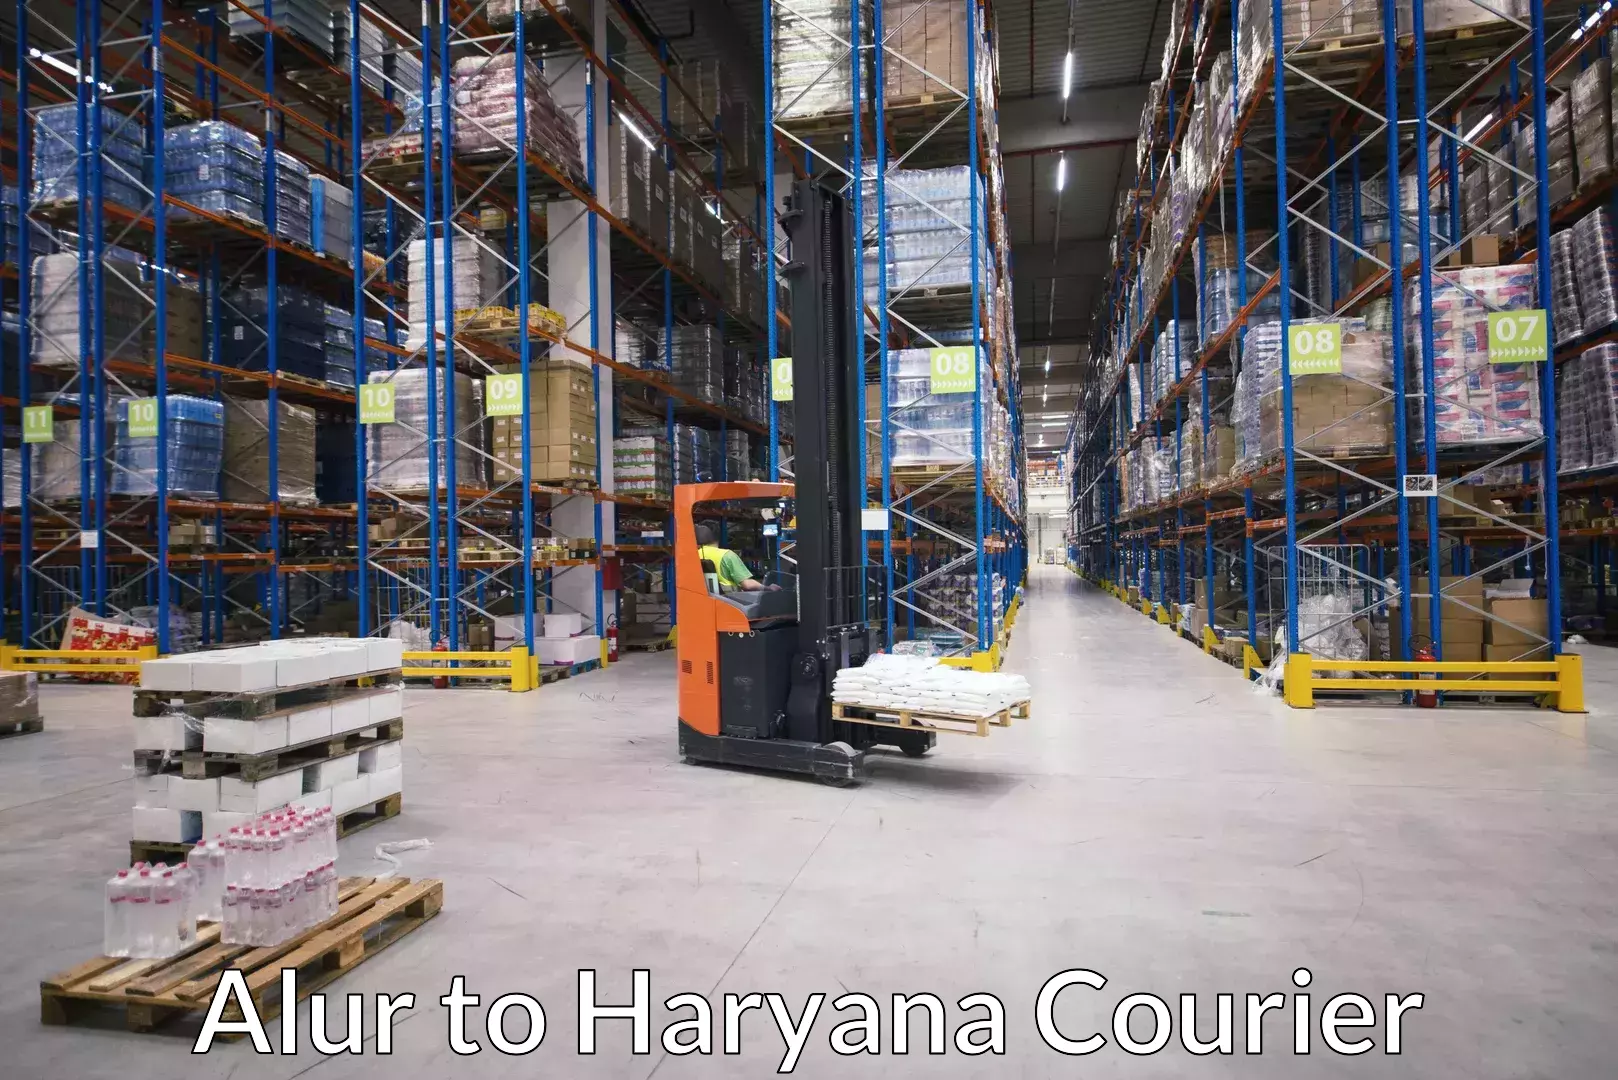 Skilled furniture transporters Alur to NCR Haryana